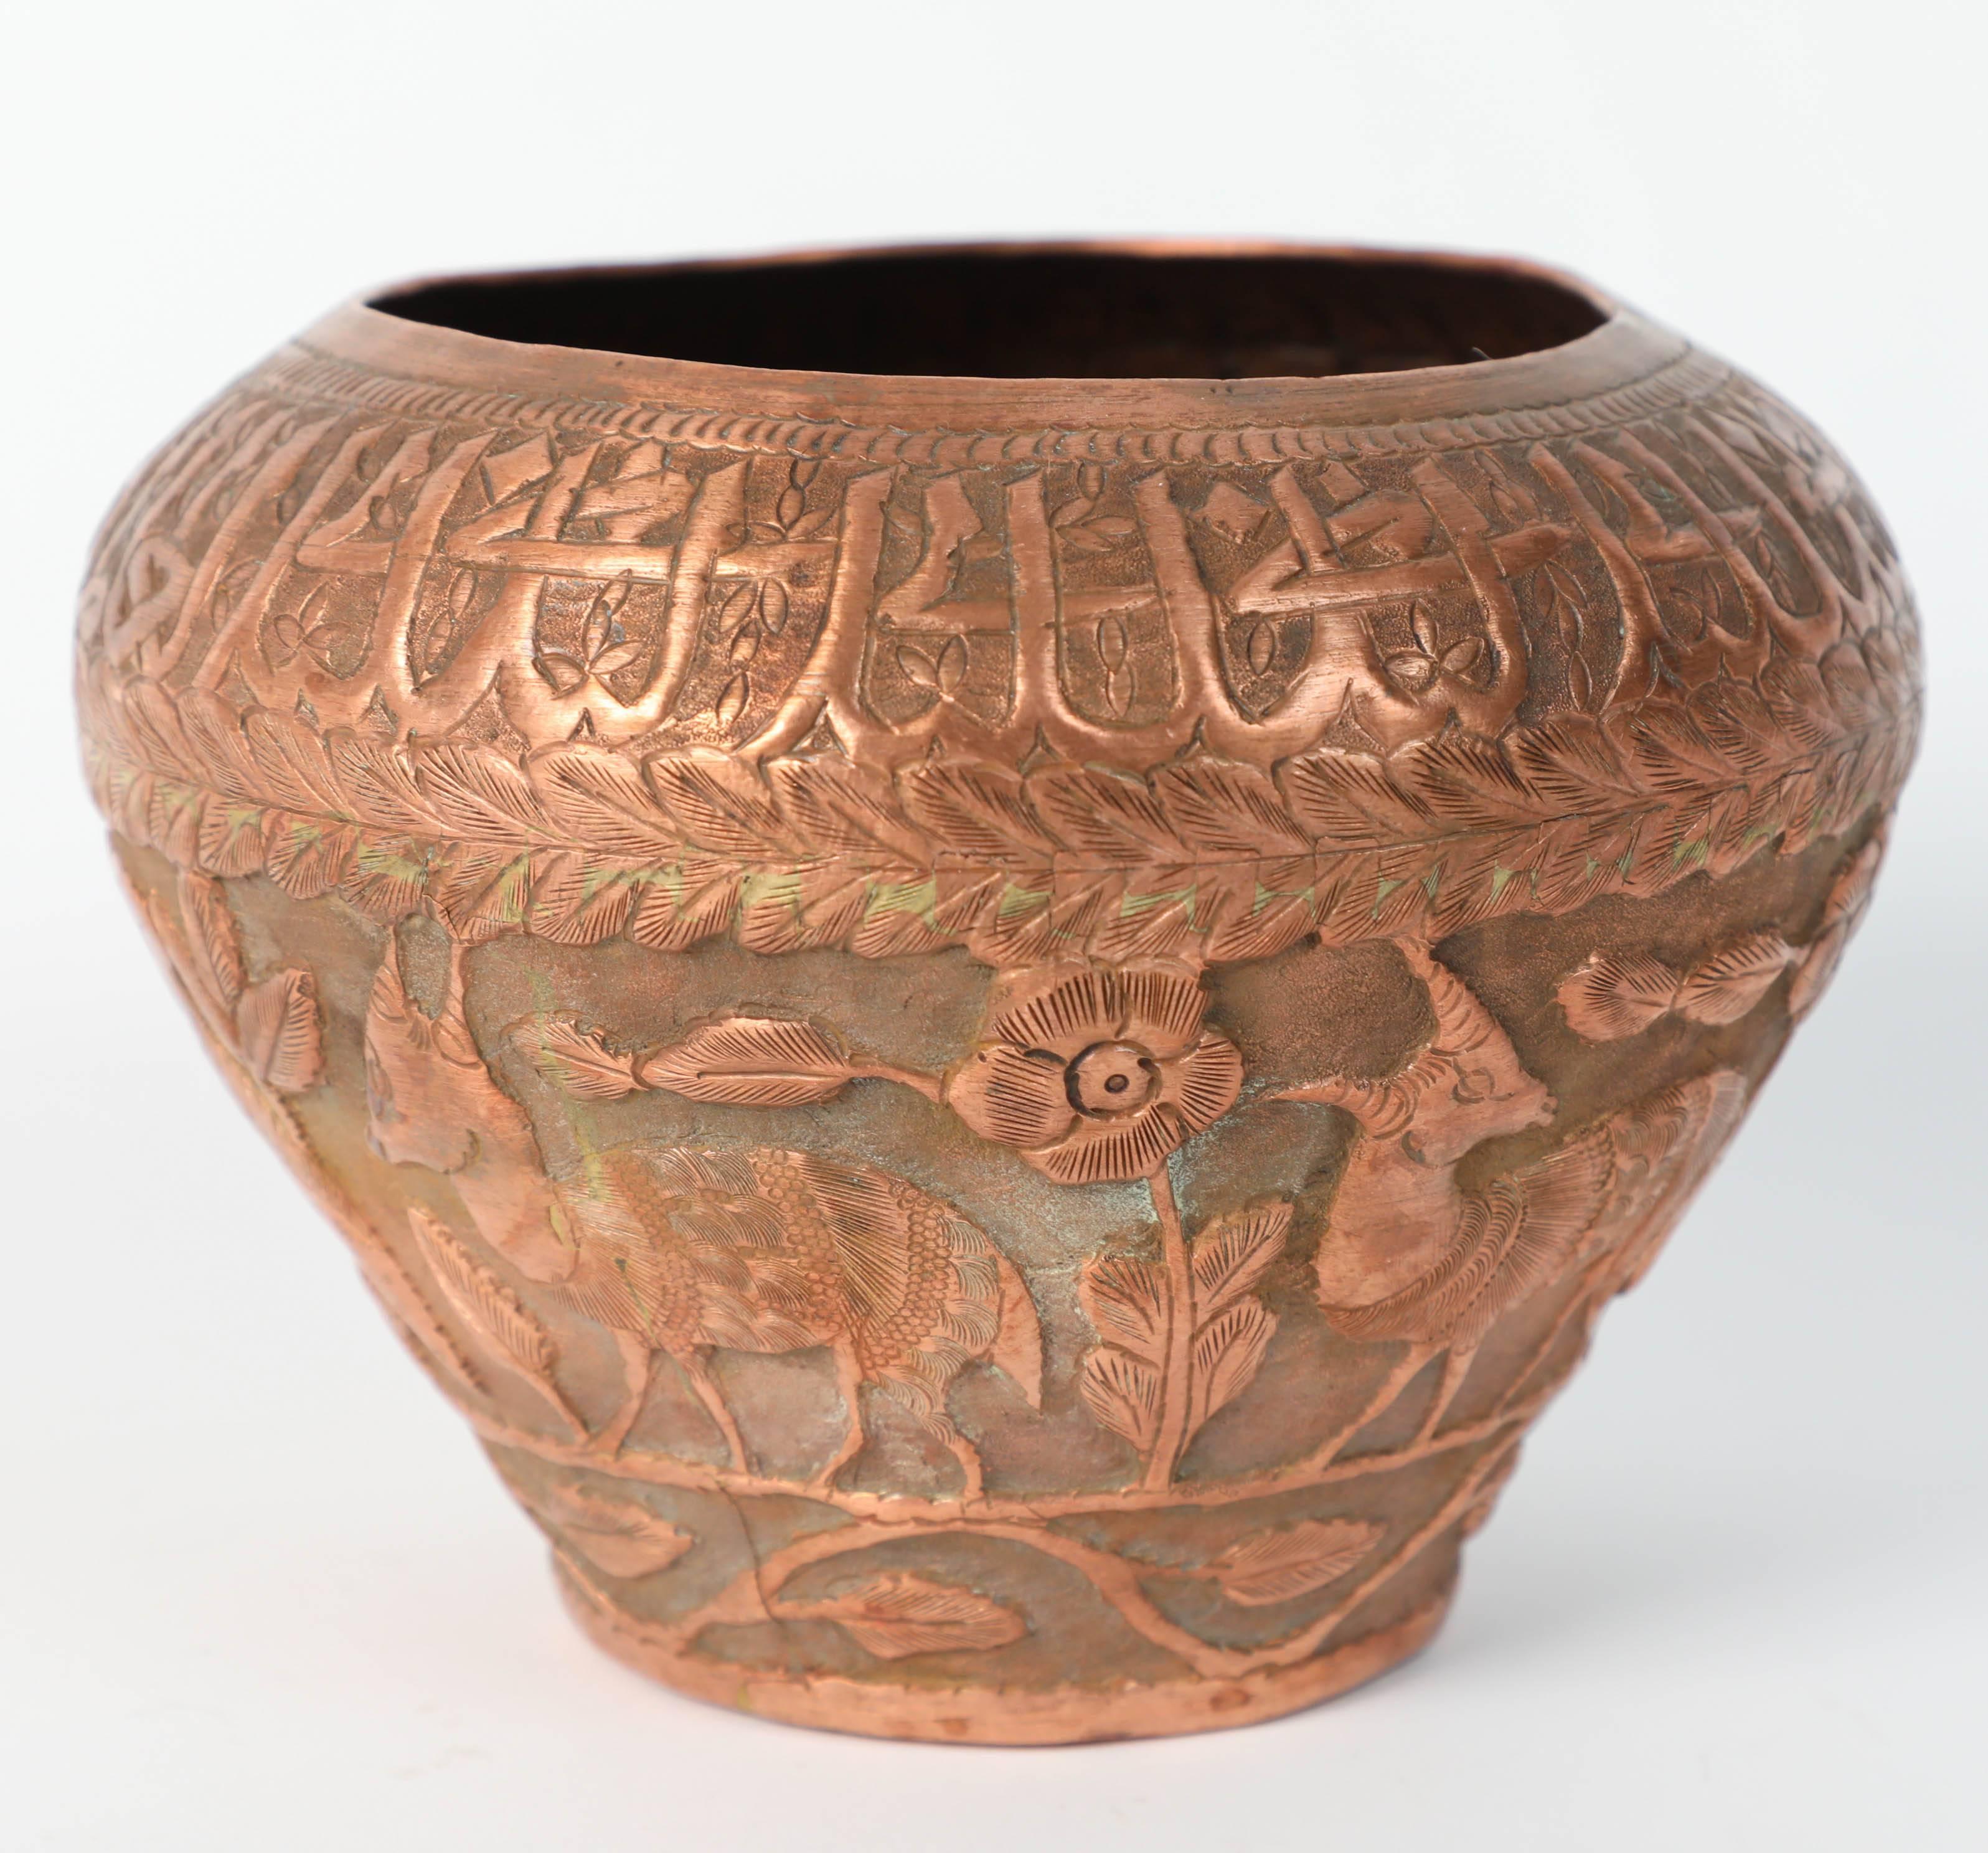 19th century Middle Eastern Islamic repousse brass bowl finely hand-etched.
Brass memorial Persian brass vase, hammered with writing calligraphy in Arabic and wild animals.
The vase has been polished from the outside.
Could be used as a jardinière,